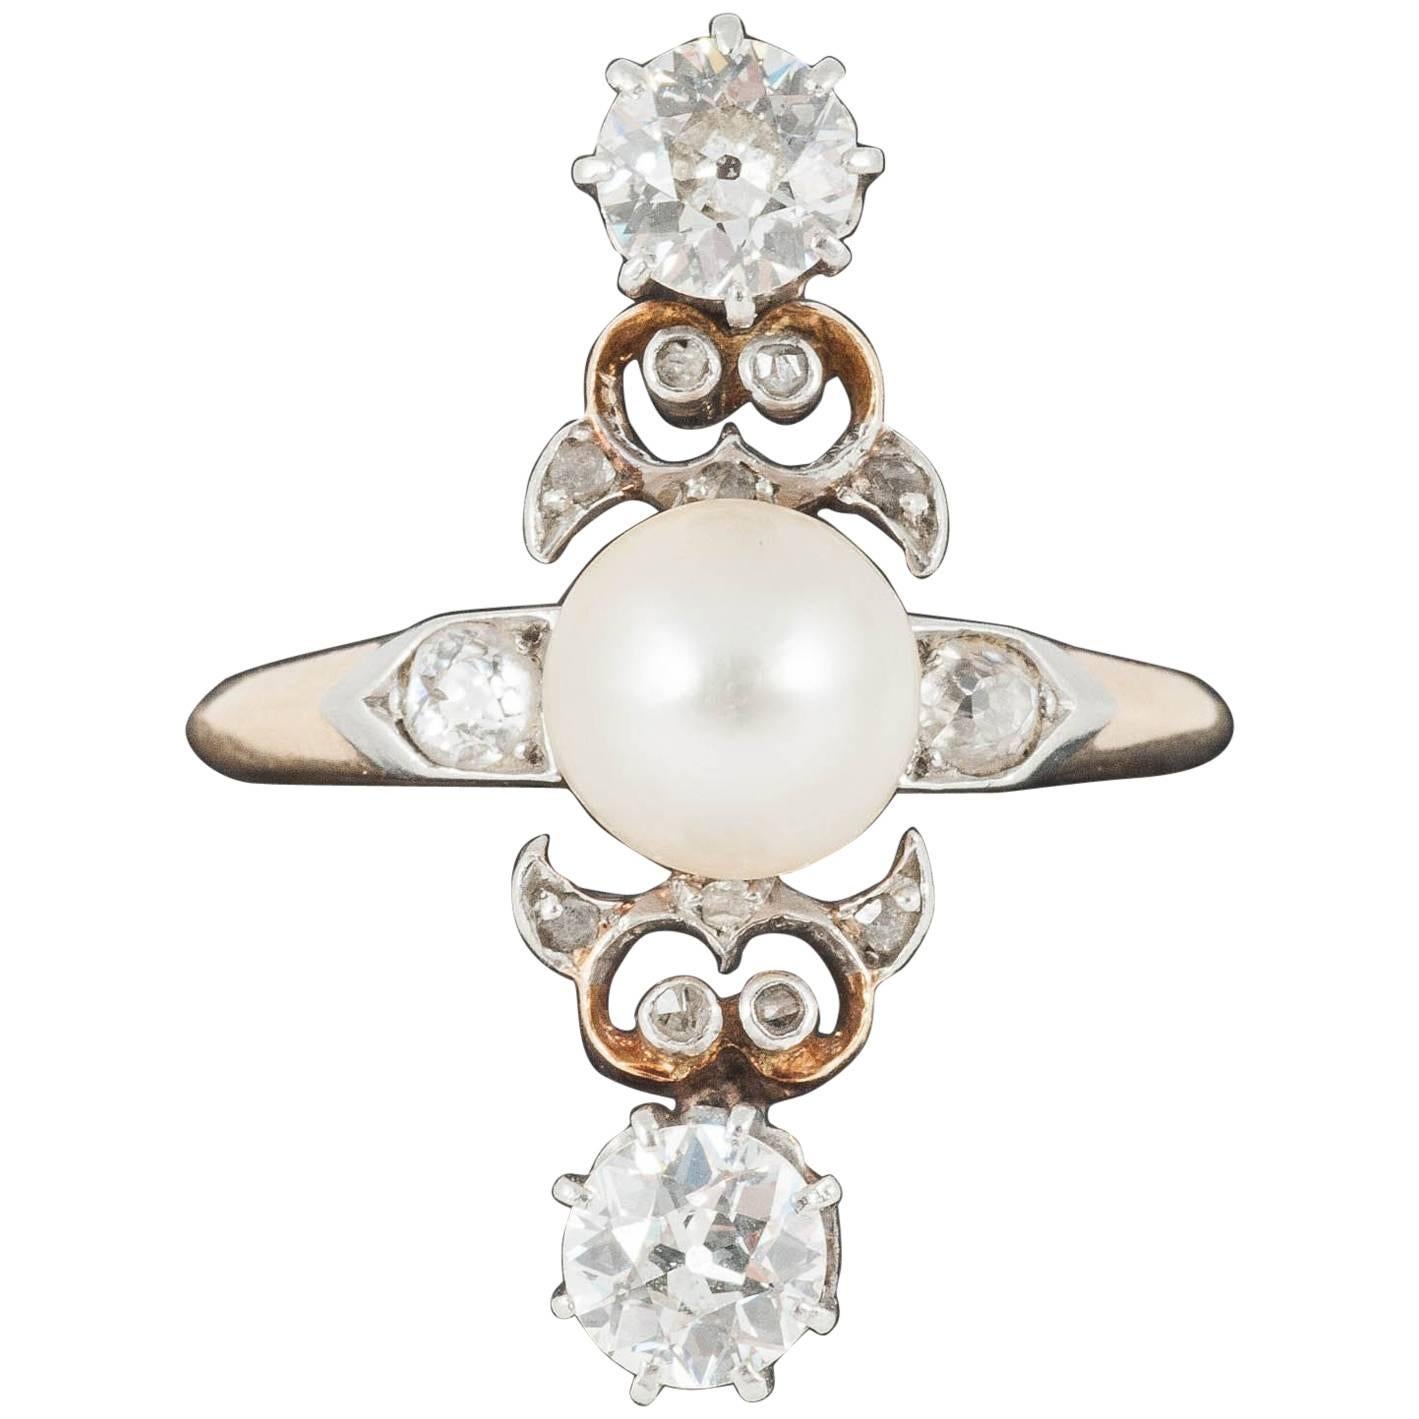  Natural Pearl and  Diamond Ring, down the finger, circa 1890, French